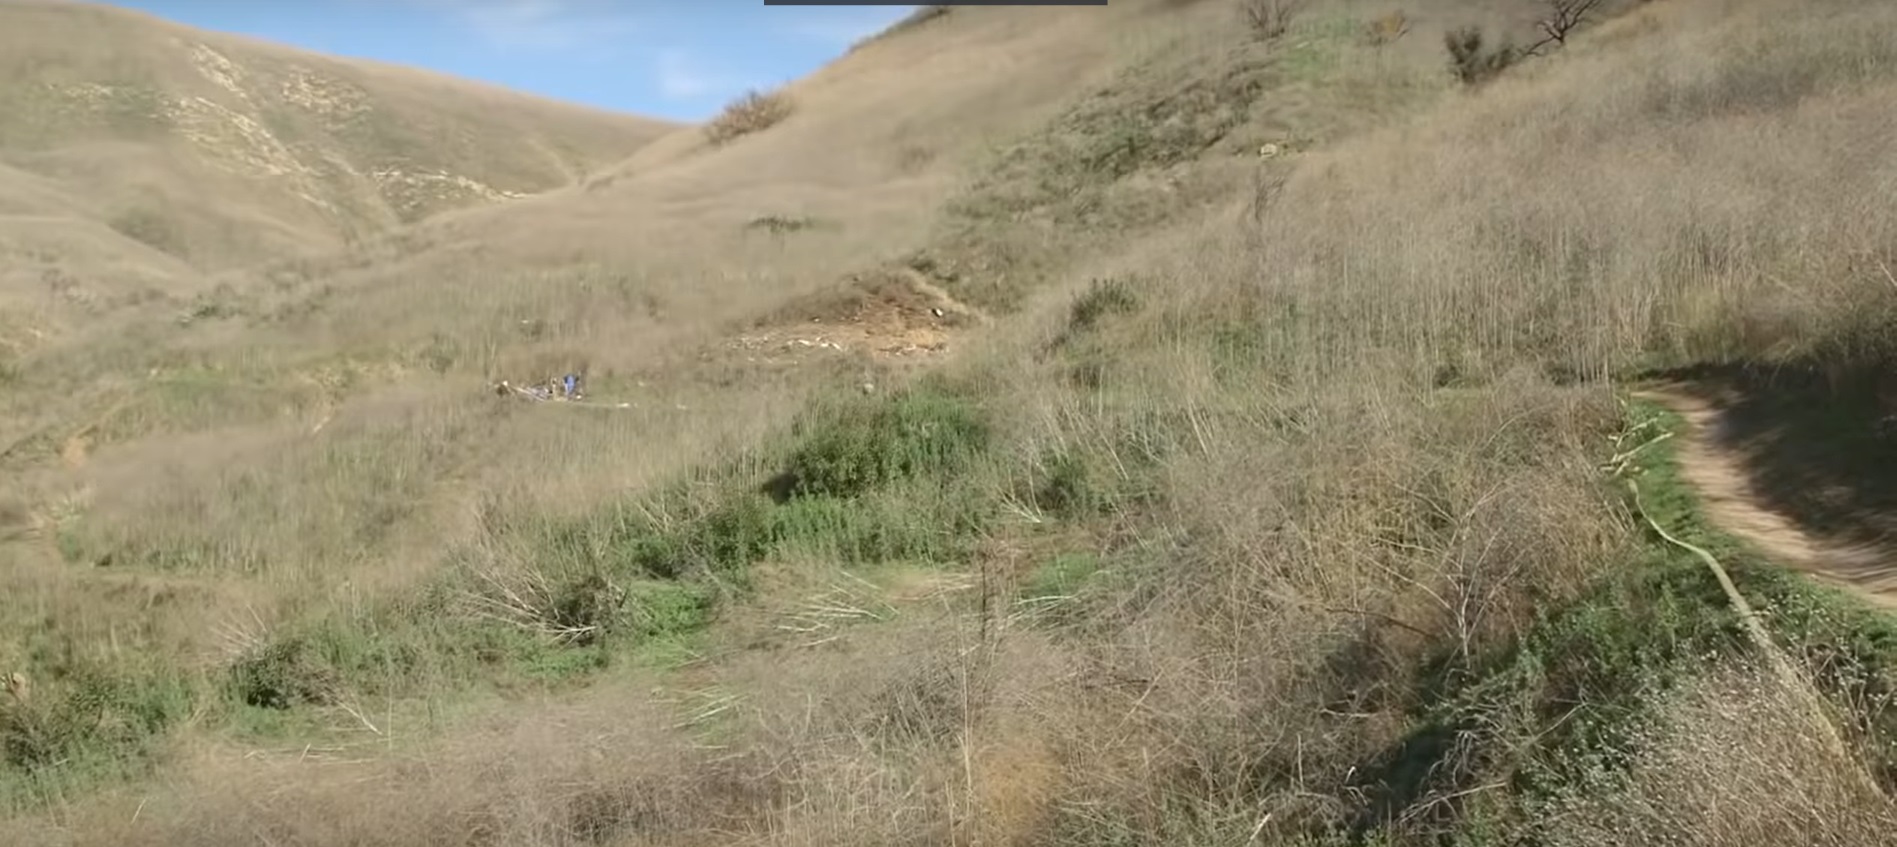 PHOTO Of How Steep The Hill In Calabasas Is Where Kobe Bryant's Helicopter Crashed